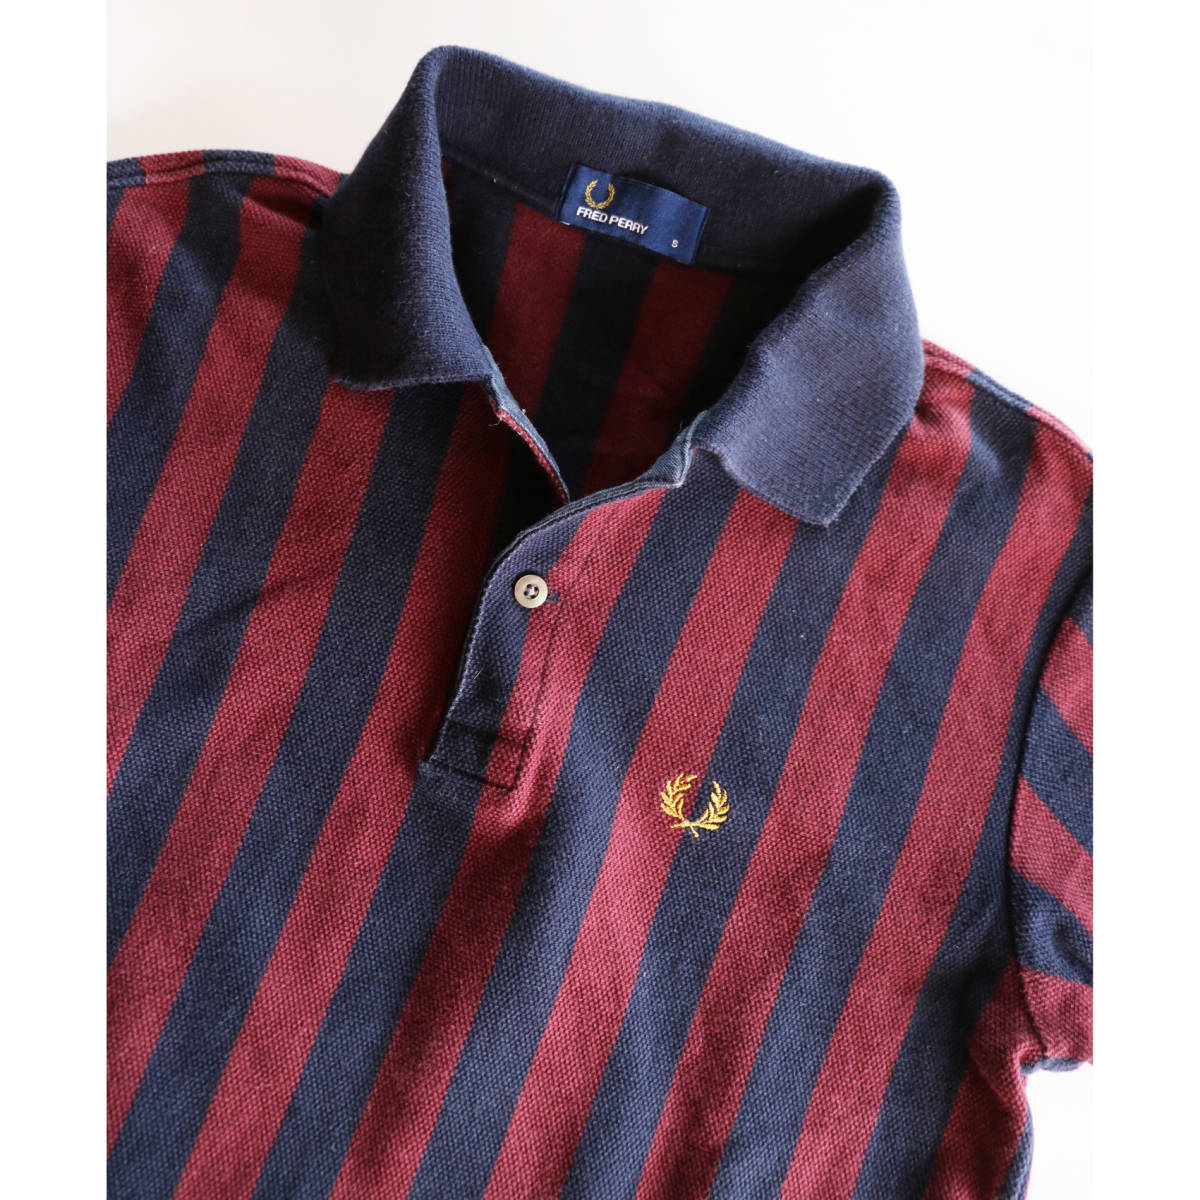 [USED] Fred Perry FREDPERRY polo-shirt stripe pattern yellowtail tissue Oi England LONDON old clothes S size * free shipping *